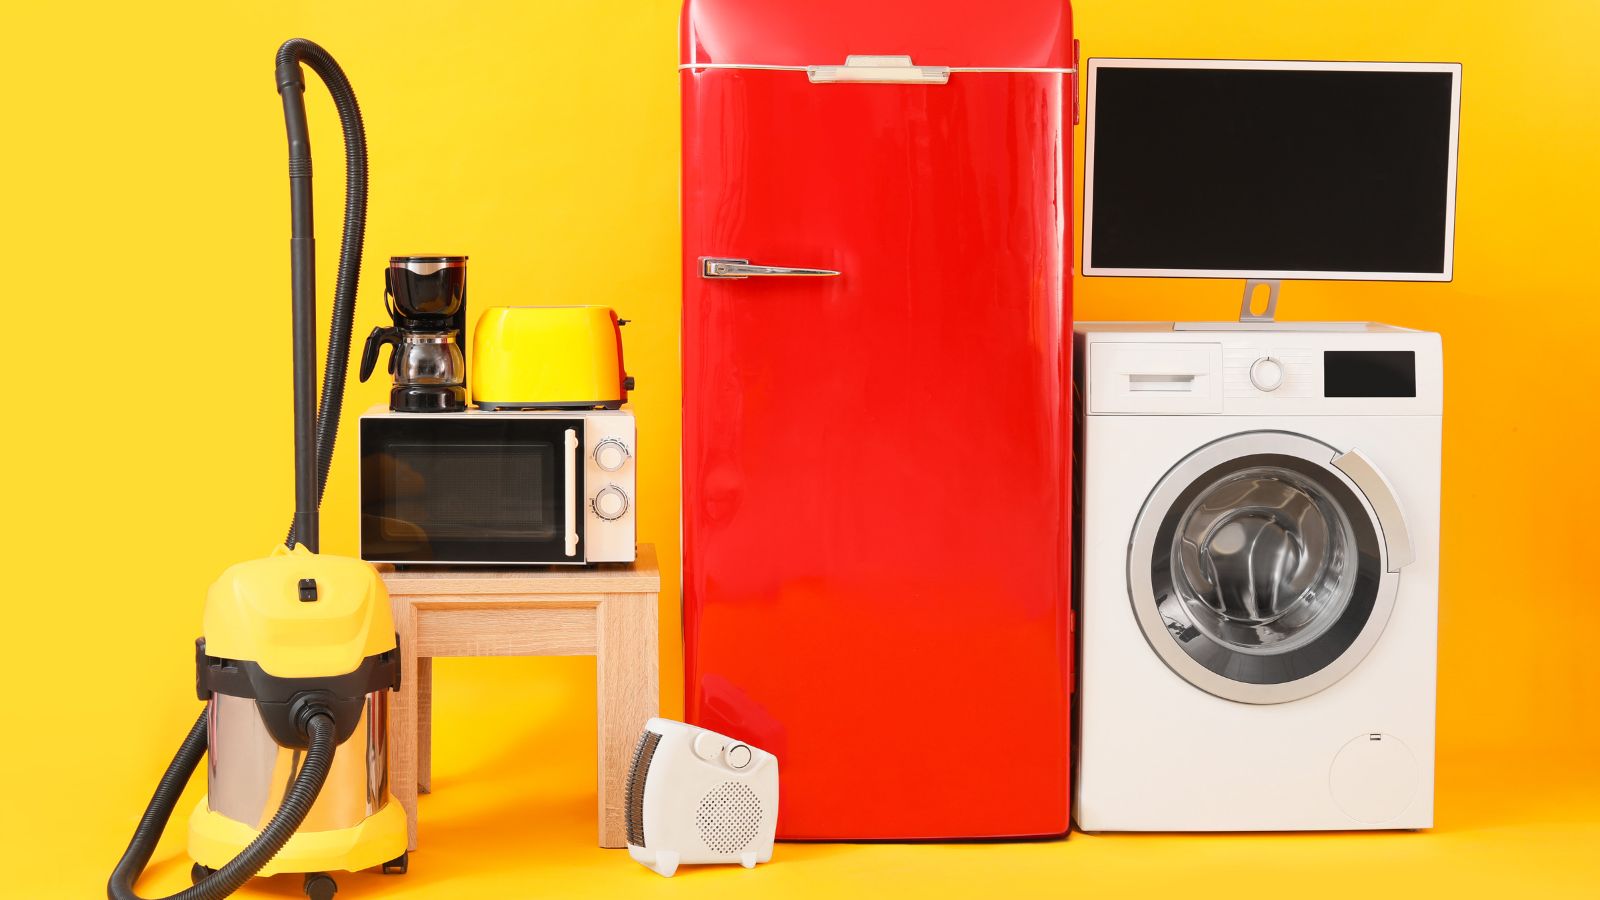 Benefits of Using Free Classifieds Ads to Buy or Sell Appliances